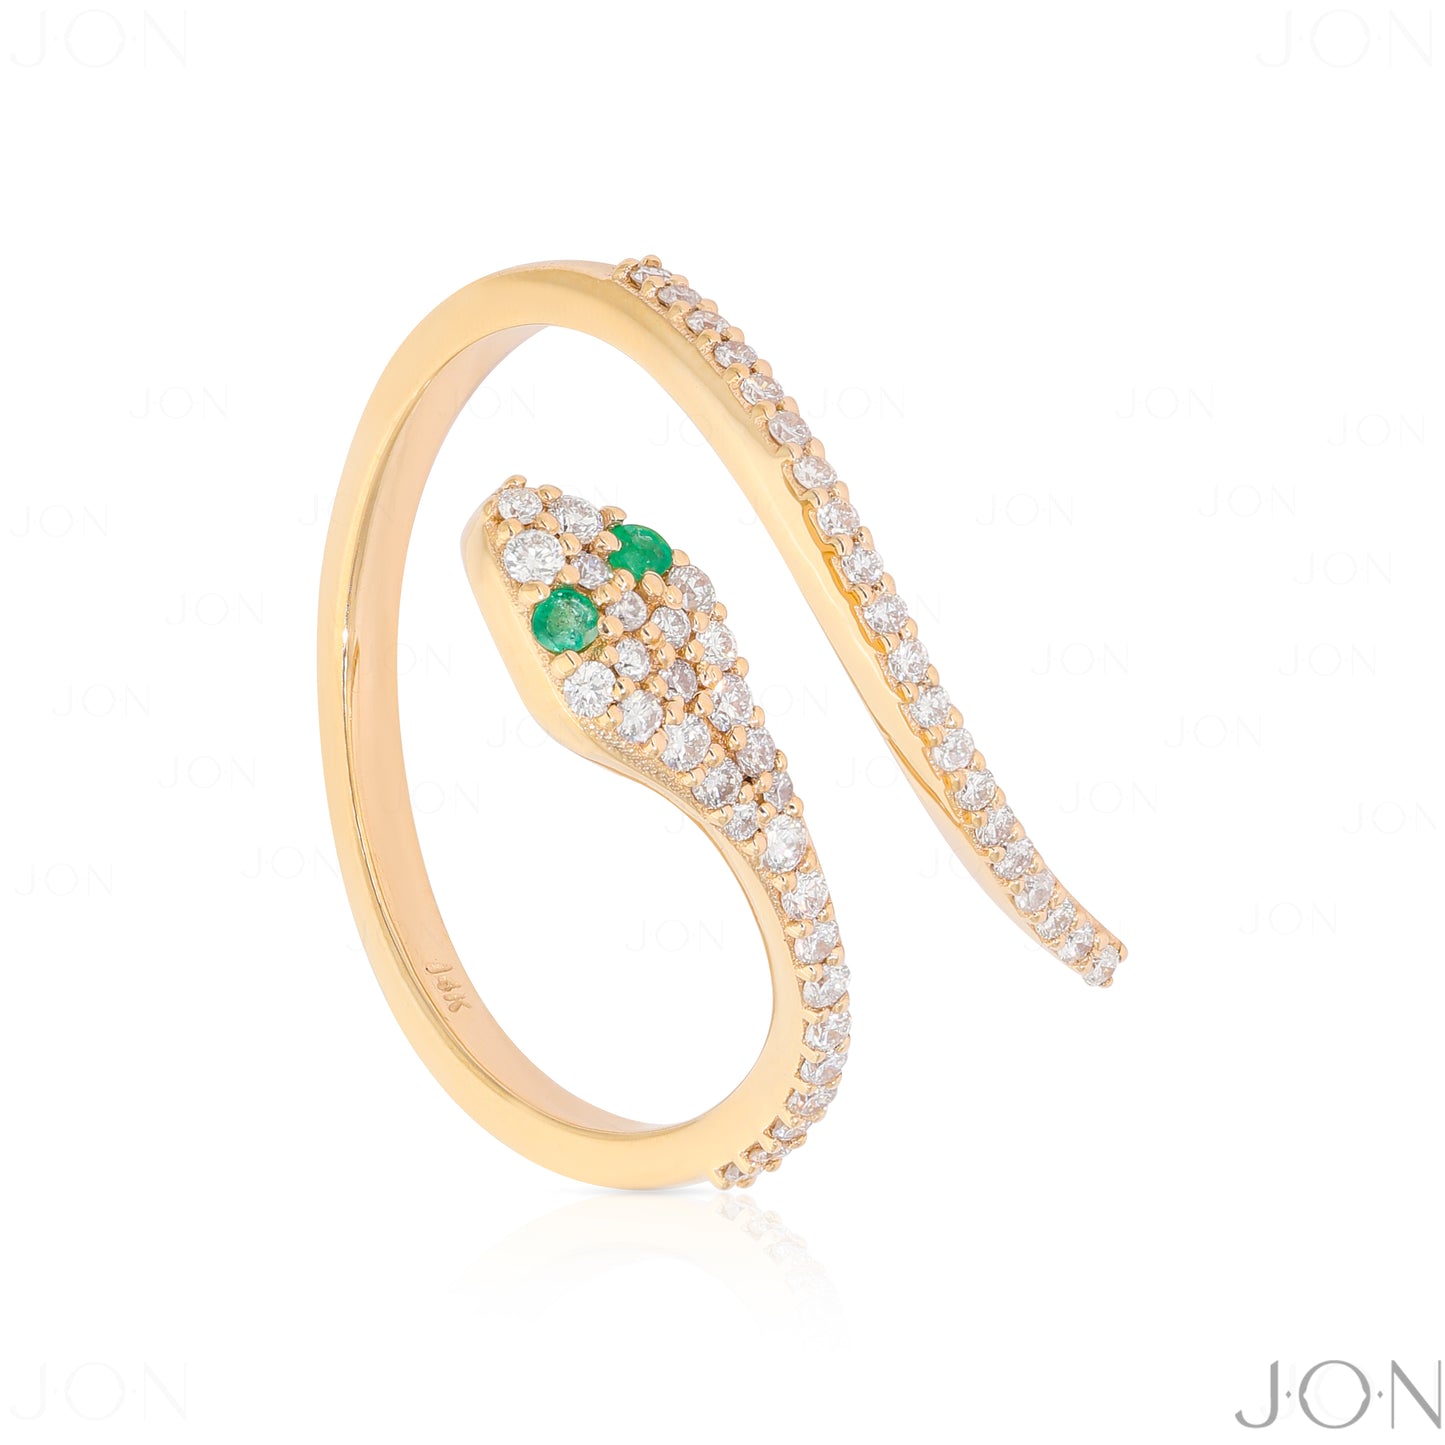 14K Gold Genuine Diamond Snake Ring  Available in Ruby Emerald and Blue Sapphire